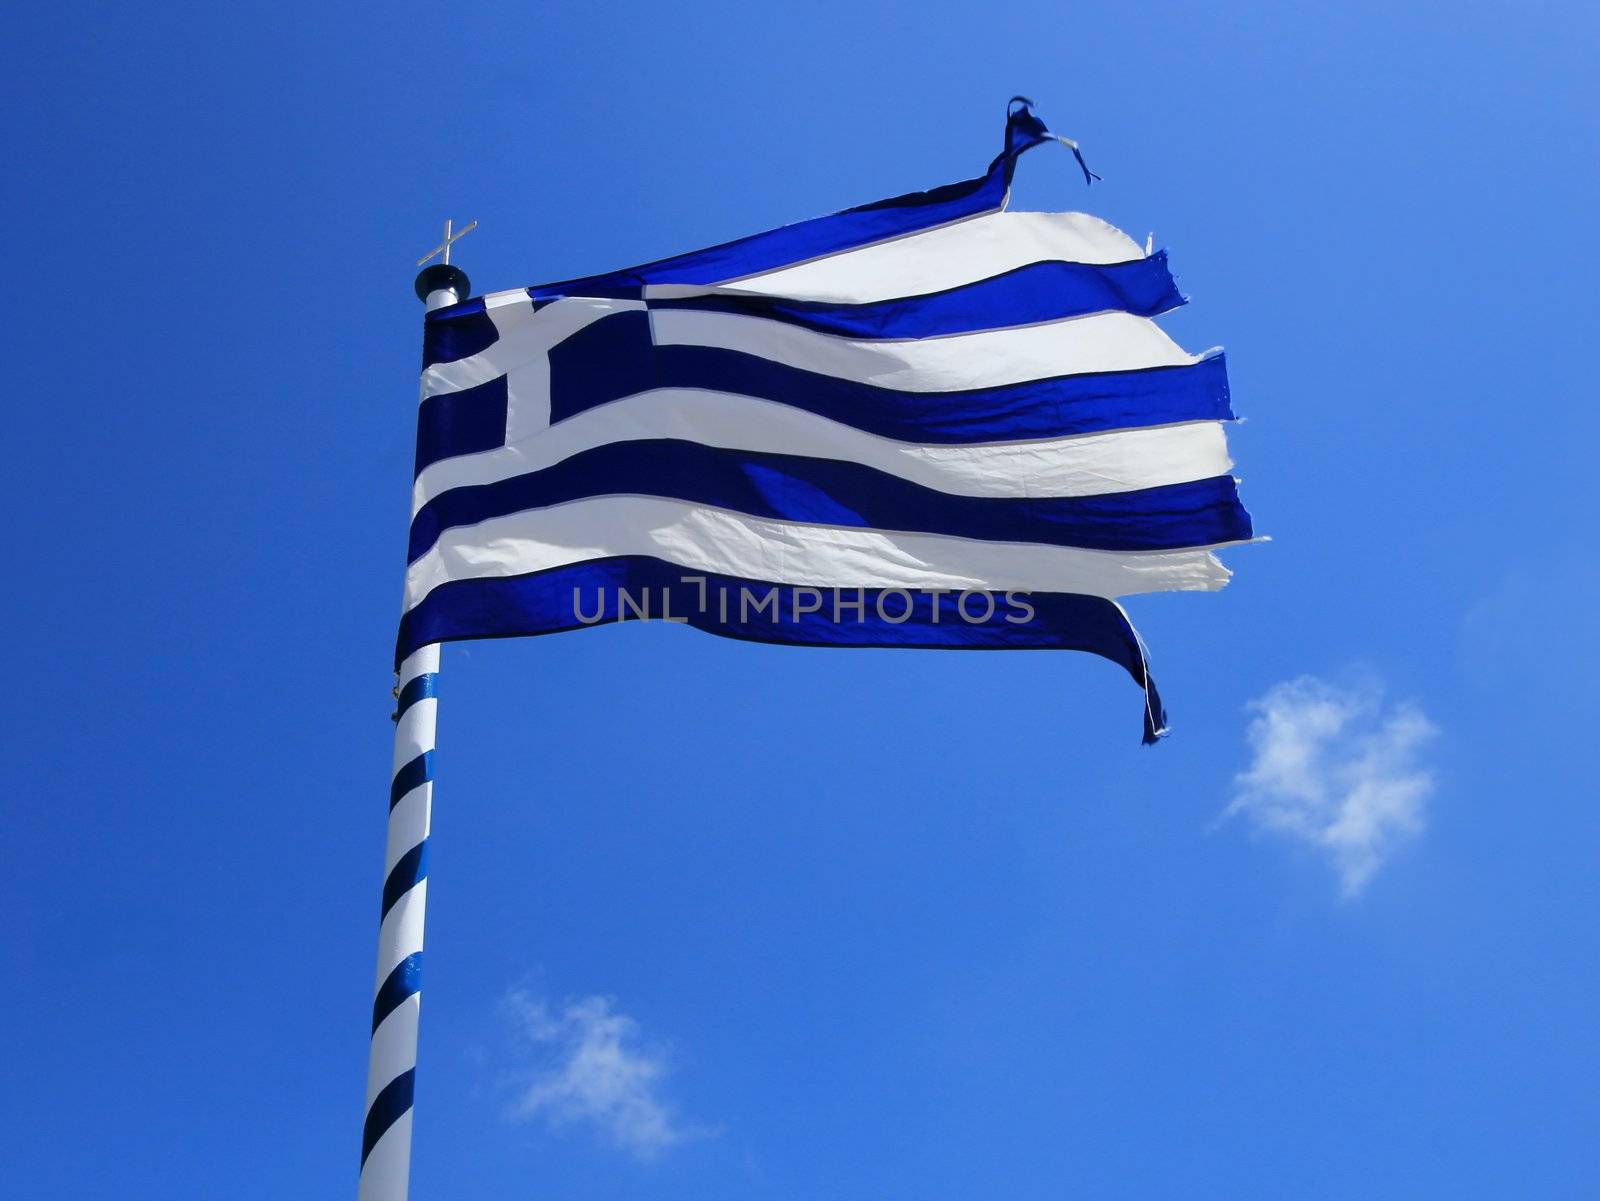 Used greek flag teared up and blue sky with little cloud background